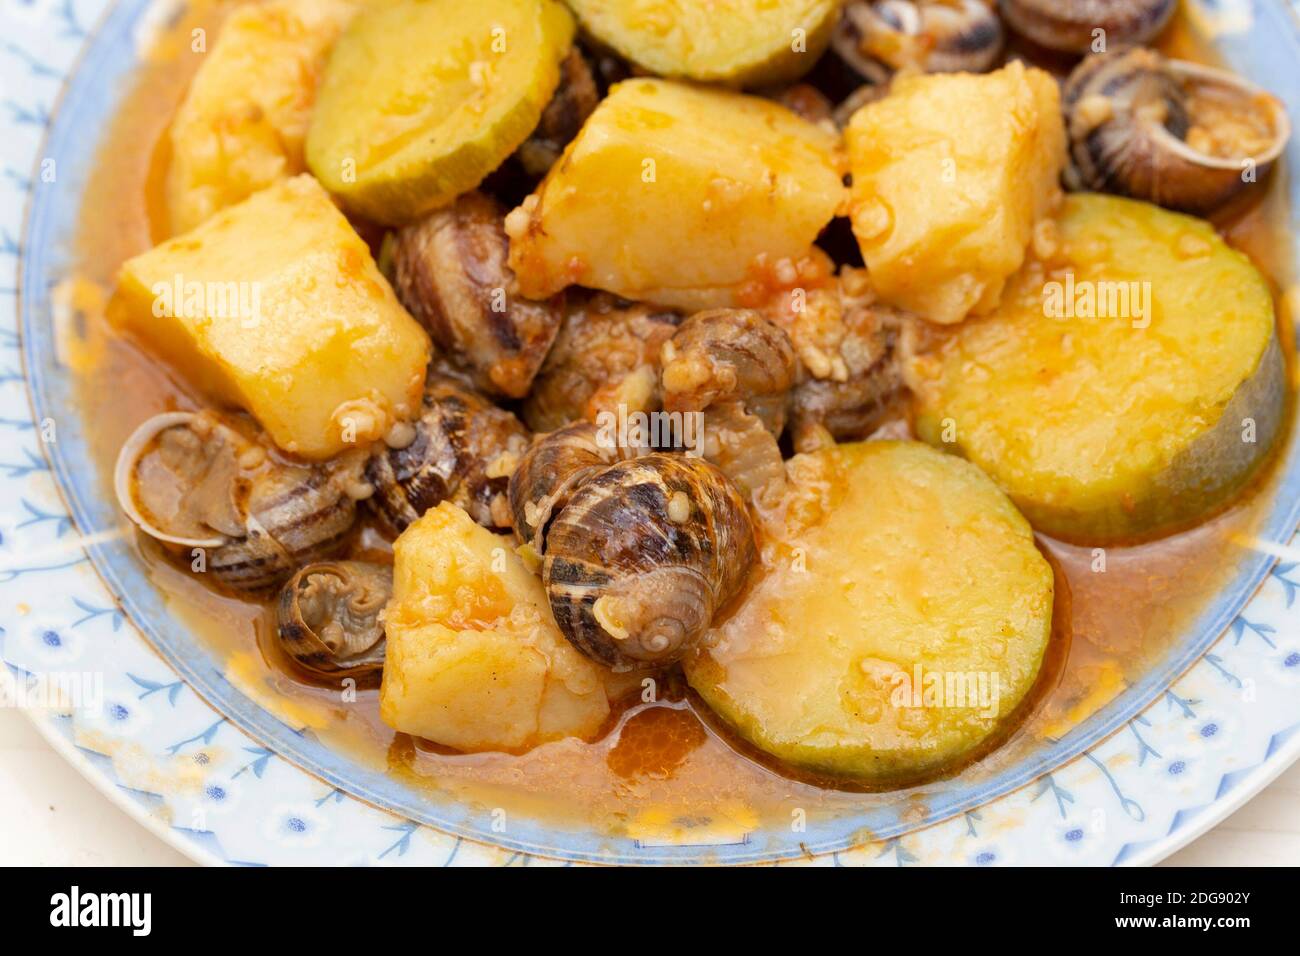 A plate of traditional Greek (Cretan) snails cooked in olive oil with potatoes and courgettes, an island speciality Stock Photo